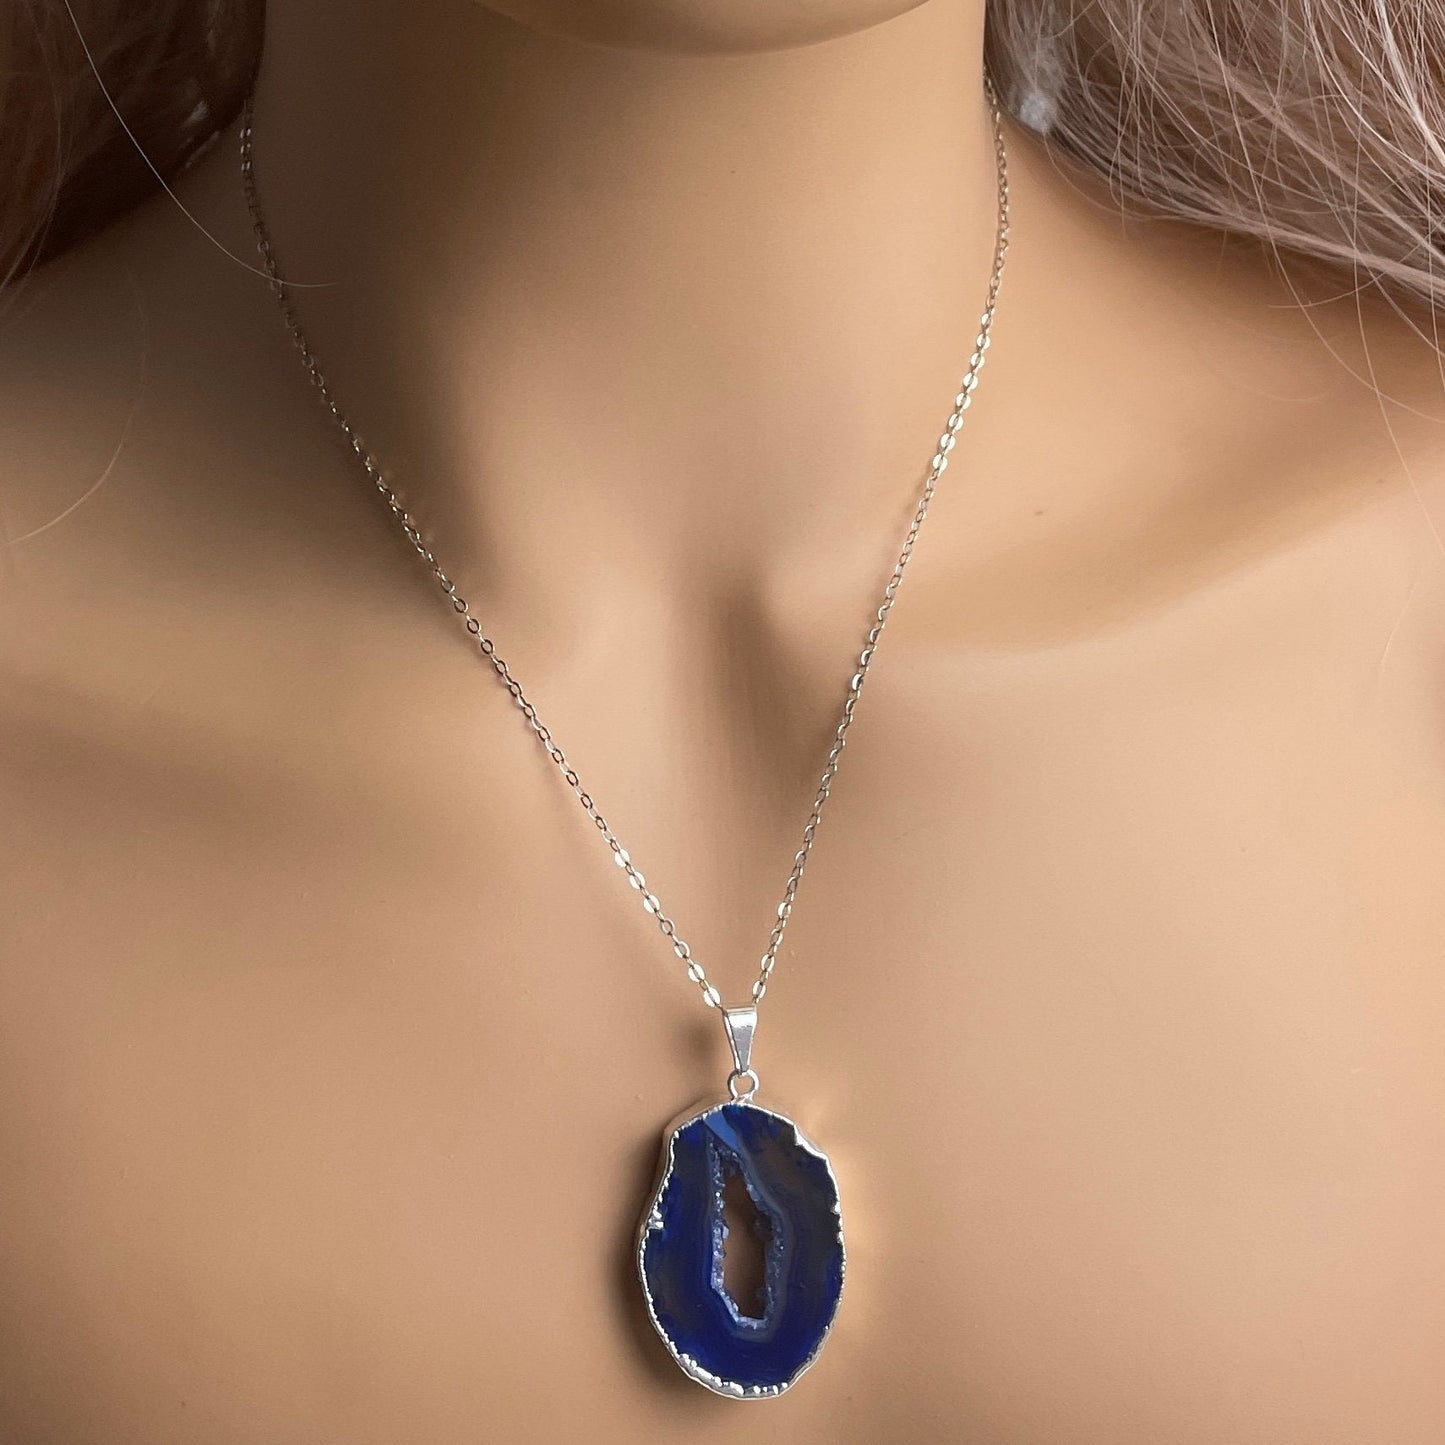 Blue Geode Necklace Silver, Boho Statement Sliced Geode Pendant for Layering, Christmas Gifts For Best Friend, G14-296